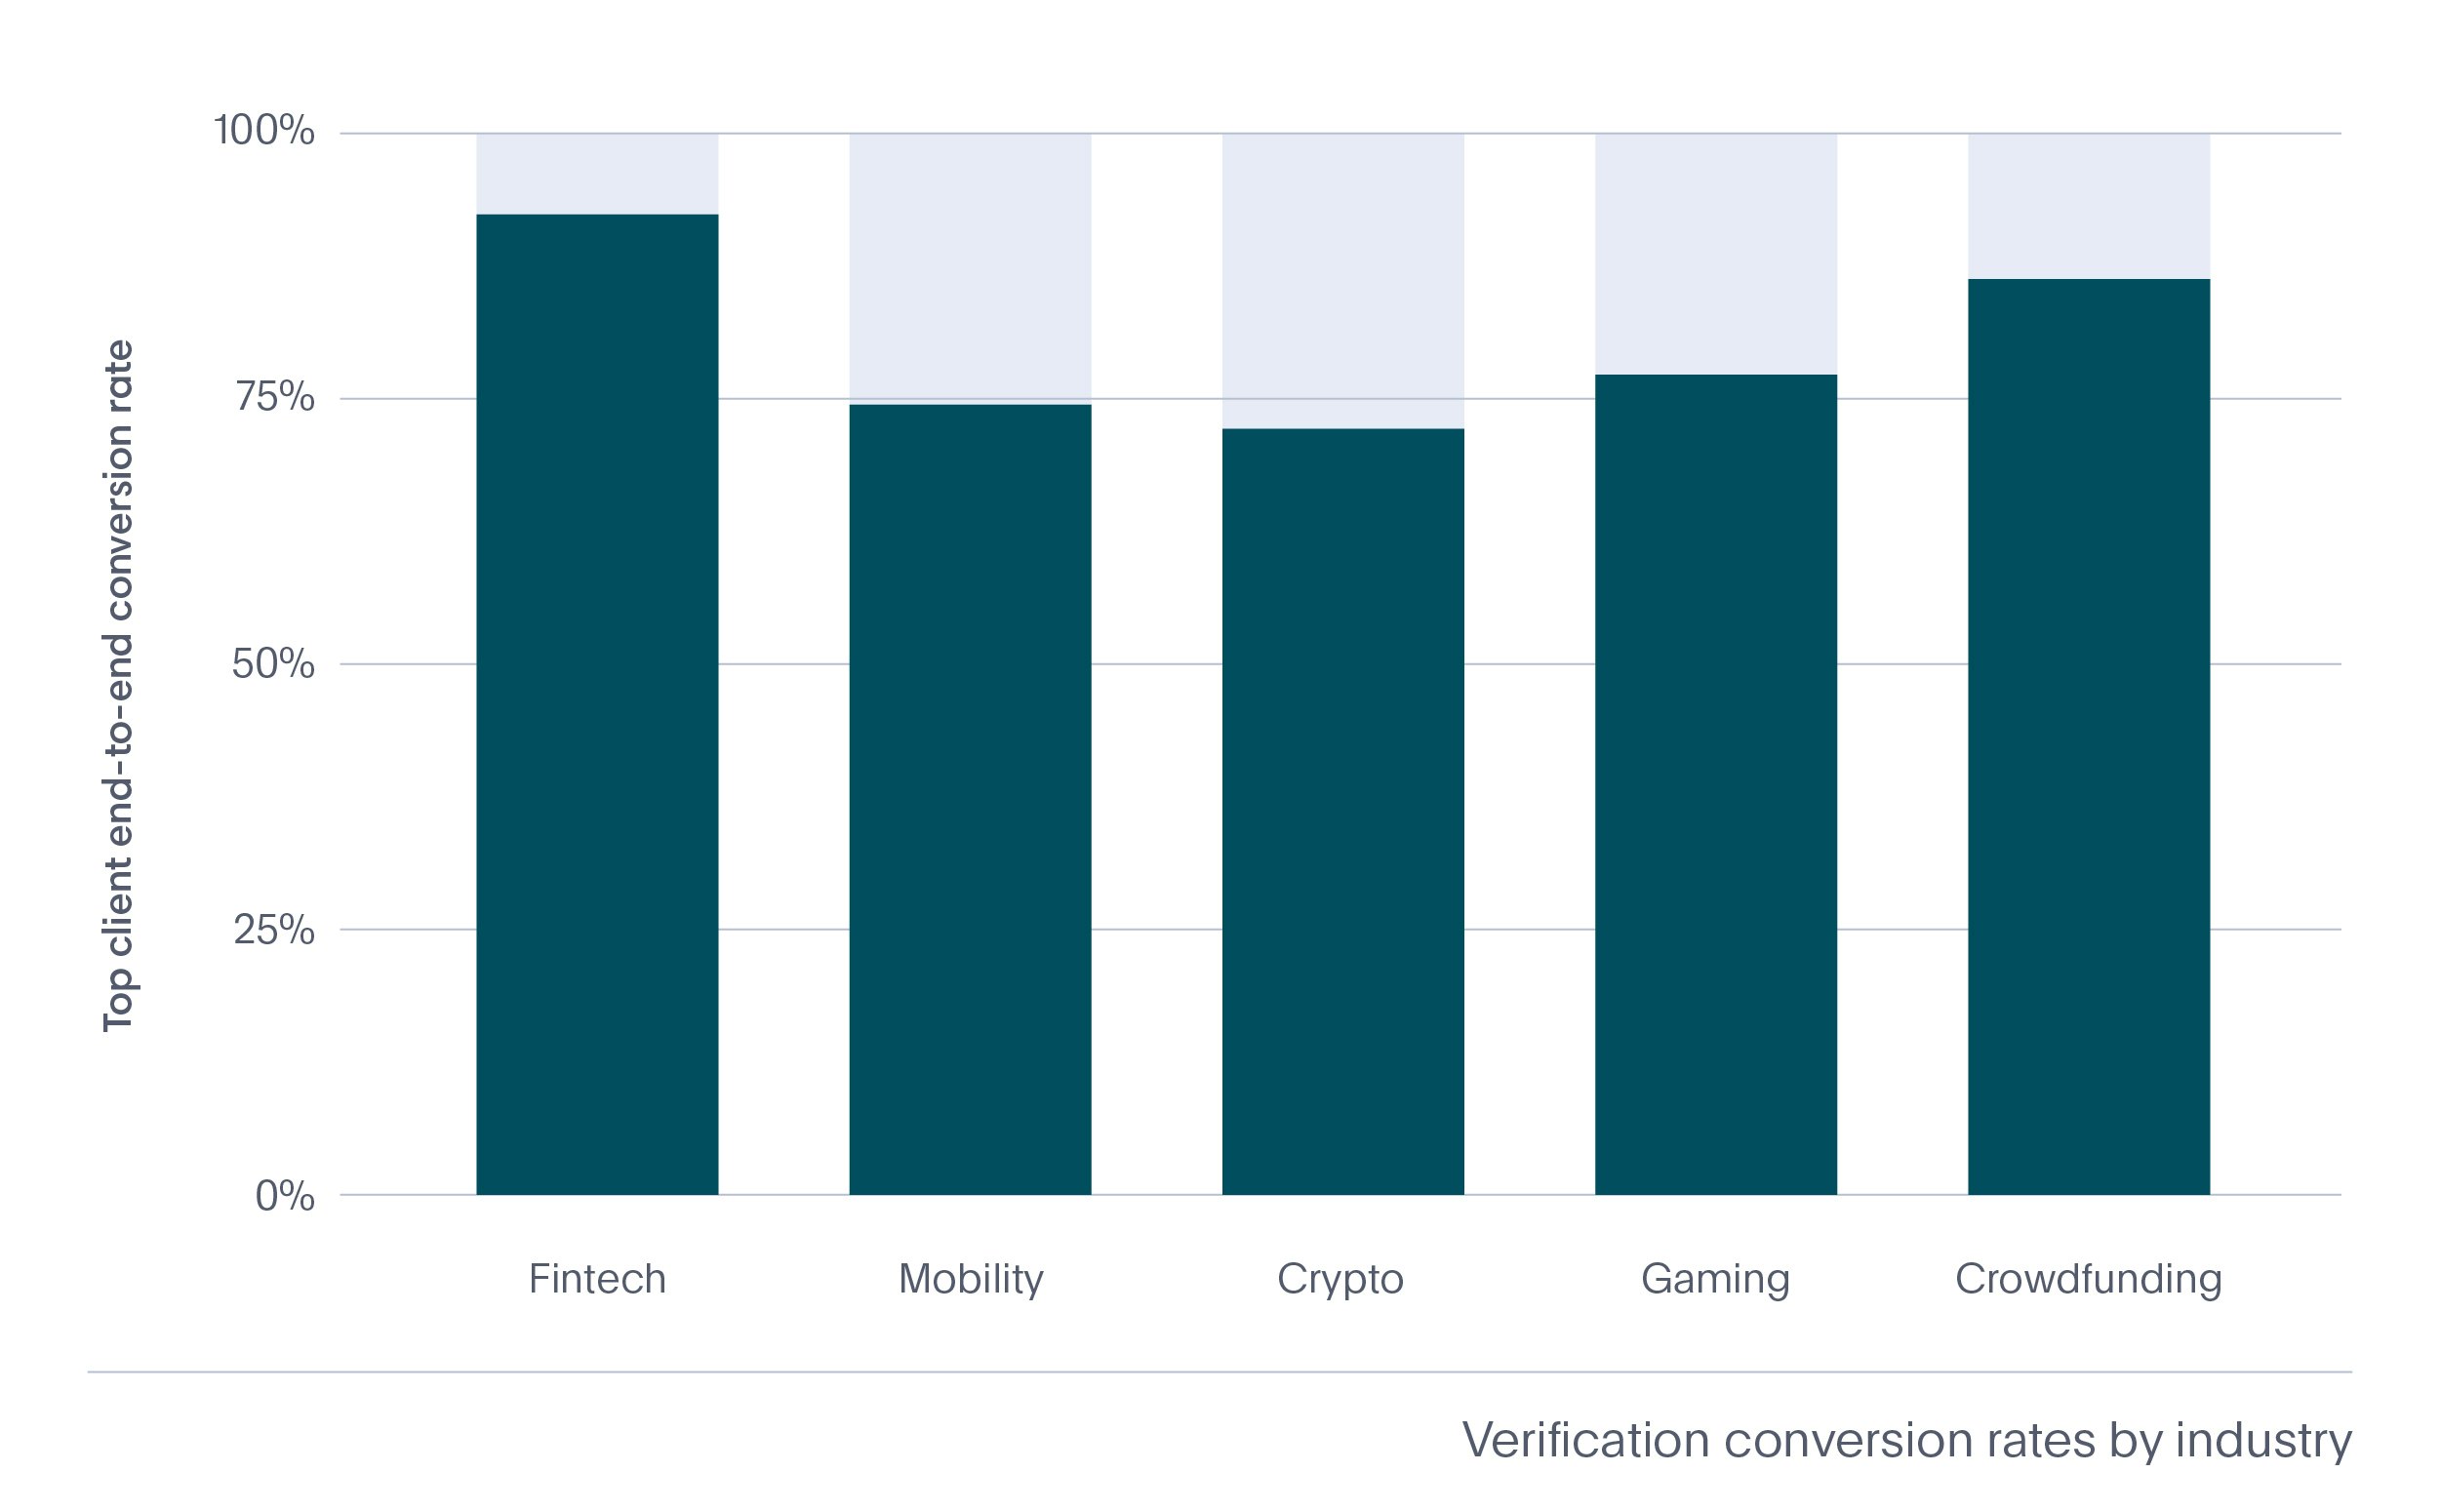 Identity verification conversion rates by industry